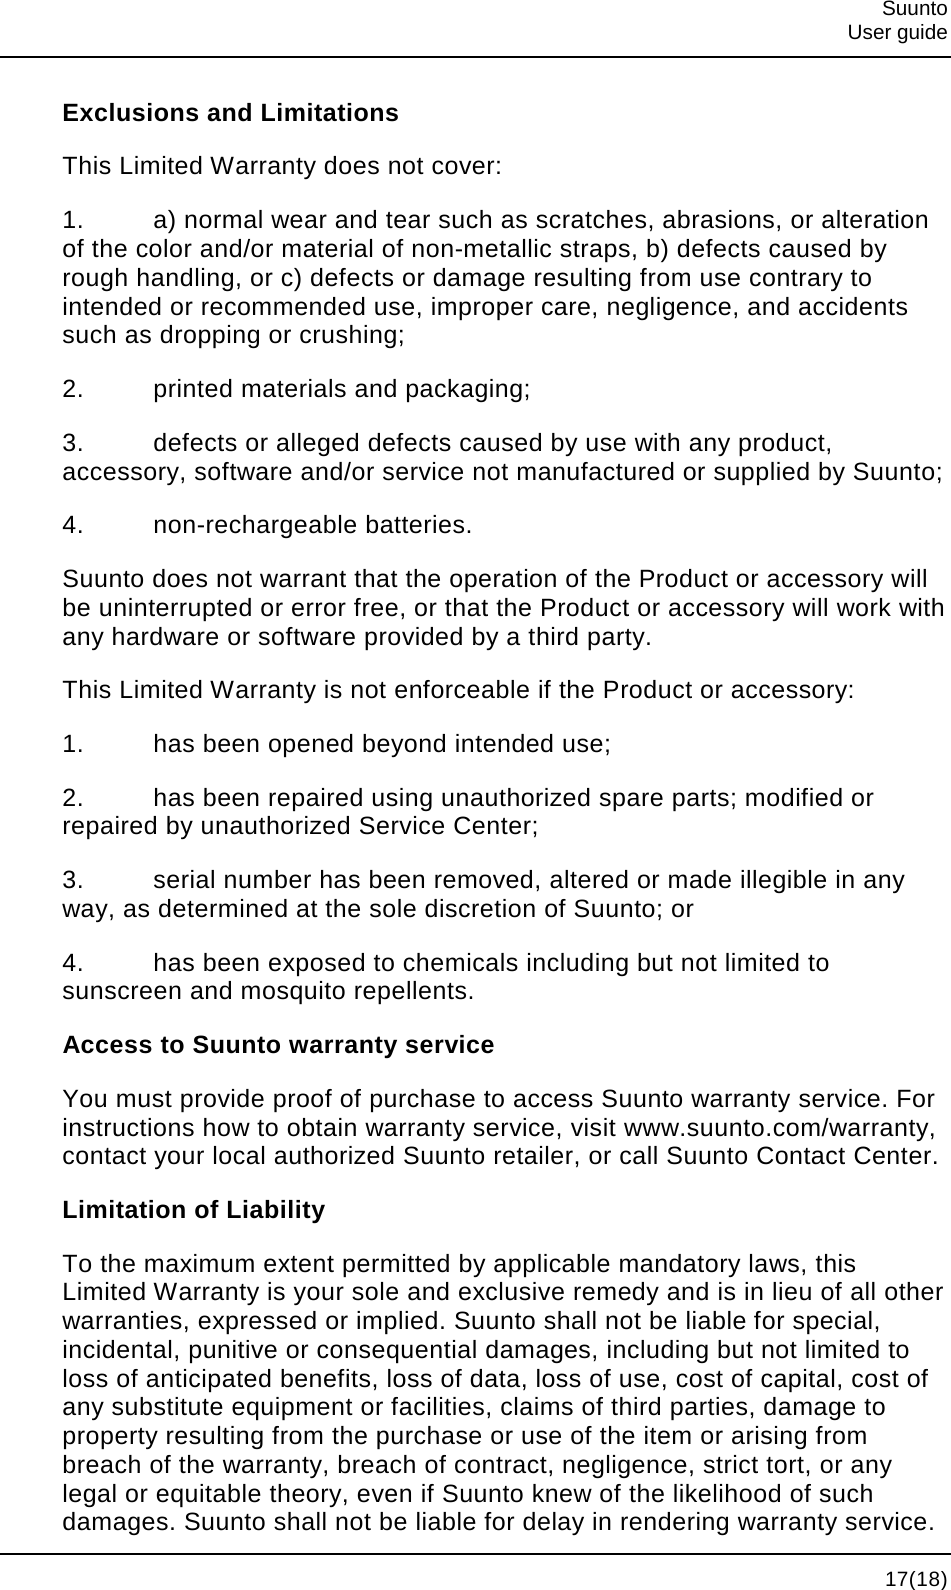  Suunto  User guide  17(18) Exclusions and Limitations This Limited Warranty does not cover: 1. a) normal wear and tear such as scratches, abrasions, or alteration of the color and/or material of non-metallic straps, b) defects caused by rough handling, or c) defects or damage resulting from use contrary to intended or recommended use, improper care, negligence, and accidents such as dropping or crushing; 2. printed materials and packaging; 3. defects or alleged defects caused by use with any product, accessory, software and/or service not manufactured or supplied by Suunto; 4. non-rechargeable batteries. Suunto does not warrant that the operation of the Product or accessory will be uninterrupted or error free, or that the Product or accessory will work with any hardware or software provided by a third party. This Limited Warranty is not enforceable if the Product or accessory: 1. has been opened beyond intended use; 2. has been repaired using unauthorized spare parts; modified or repaired by unauthorized Service Center; 3. serial number has been removed, altered or made illegible in any way, as determined at the sole discretion of Suunto; or 4. has been exposed to chemicals including but not limited to sunscreen and mosquito repellents. Access to Suunto warranty service You must provide proof of purchase to access Suunto warranty service. For instructions how to obtain warranty service, visit www.suunto.com/warranty, contact your local authorized Suunto retailer, or call Suunto Contact Center. Limitation of Liability To the maximum extent permitted by applicable mandatory laws, this Limited Warranty is your sole and exclusive remedy and is in lieu of all other warranties, expressed or implied. Suunto shall not be liable for special, incidental, punitive or consequential damages, including but not limited to loss of anticipated benefits, loss of data, loss of use, cost of capital, cost of any substitute equipment or facilities, claims of third parties, damage to property resulting from the purchase or use of the item or arising from breach of the warranty, breach of contract, negligence, strict tort, or any legal or equitable theory, even if Suunto knew of the likelihood of such damages. Suunto shall not be liable for delay in rendering warranty service. 